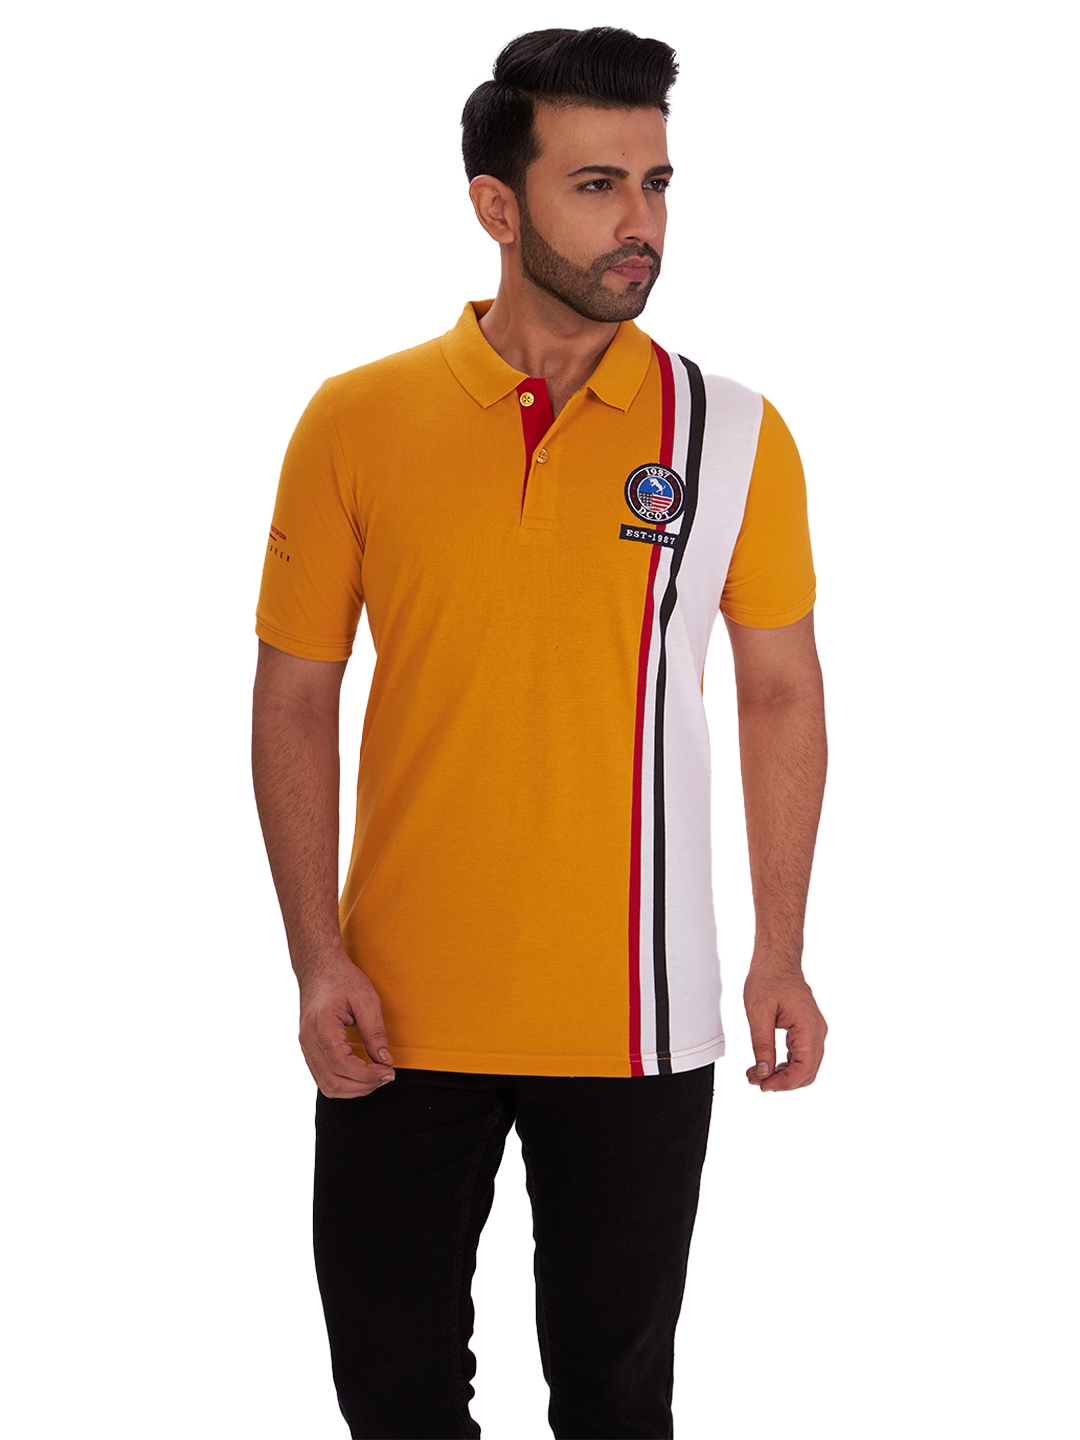 D'cot by Donear | D'cot by Donear Mens Multi Cotton T-Shirts